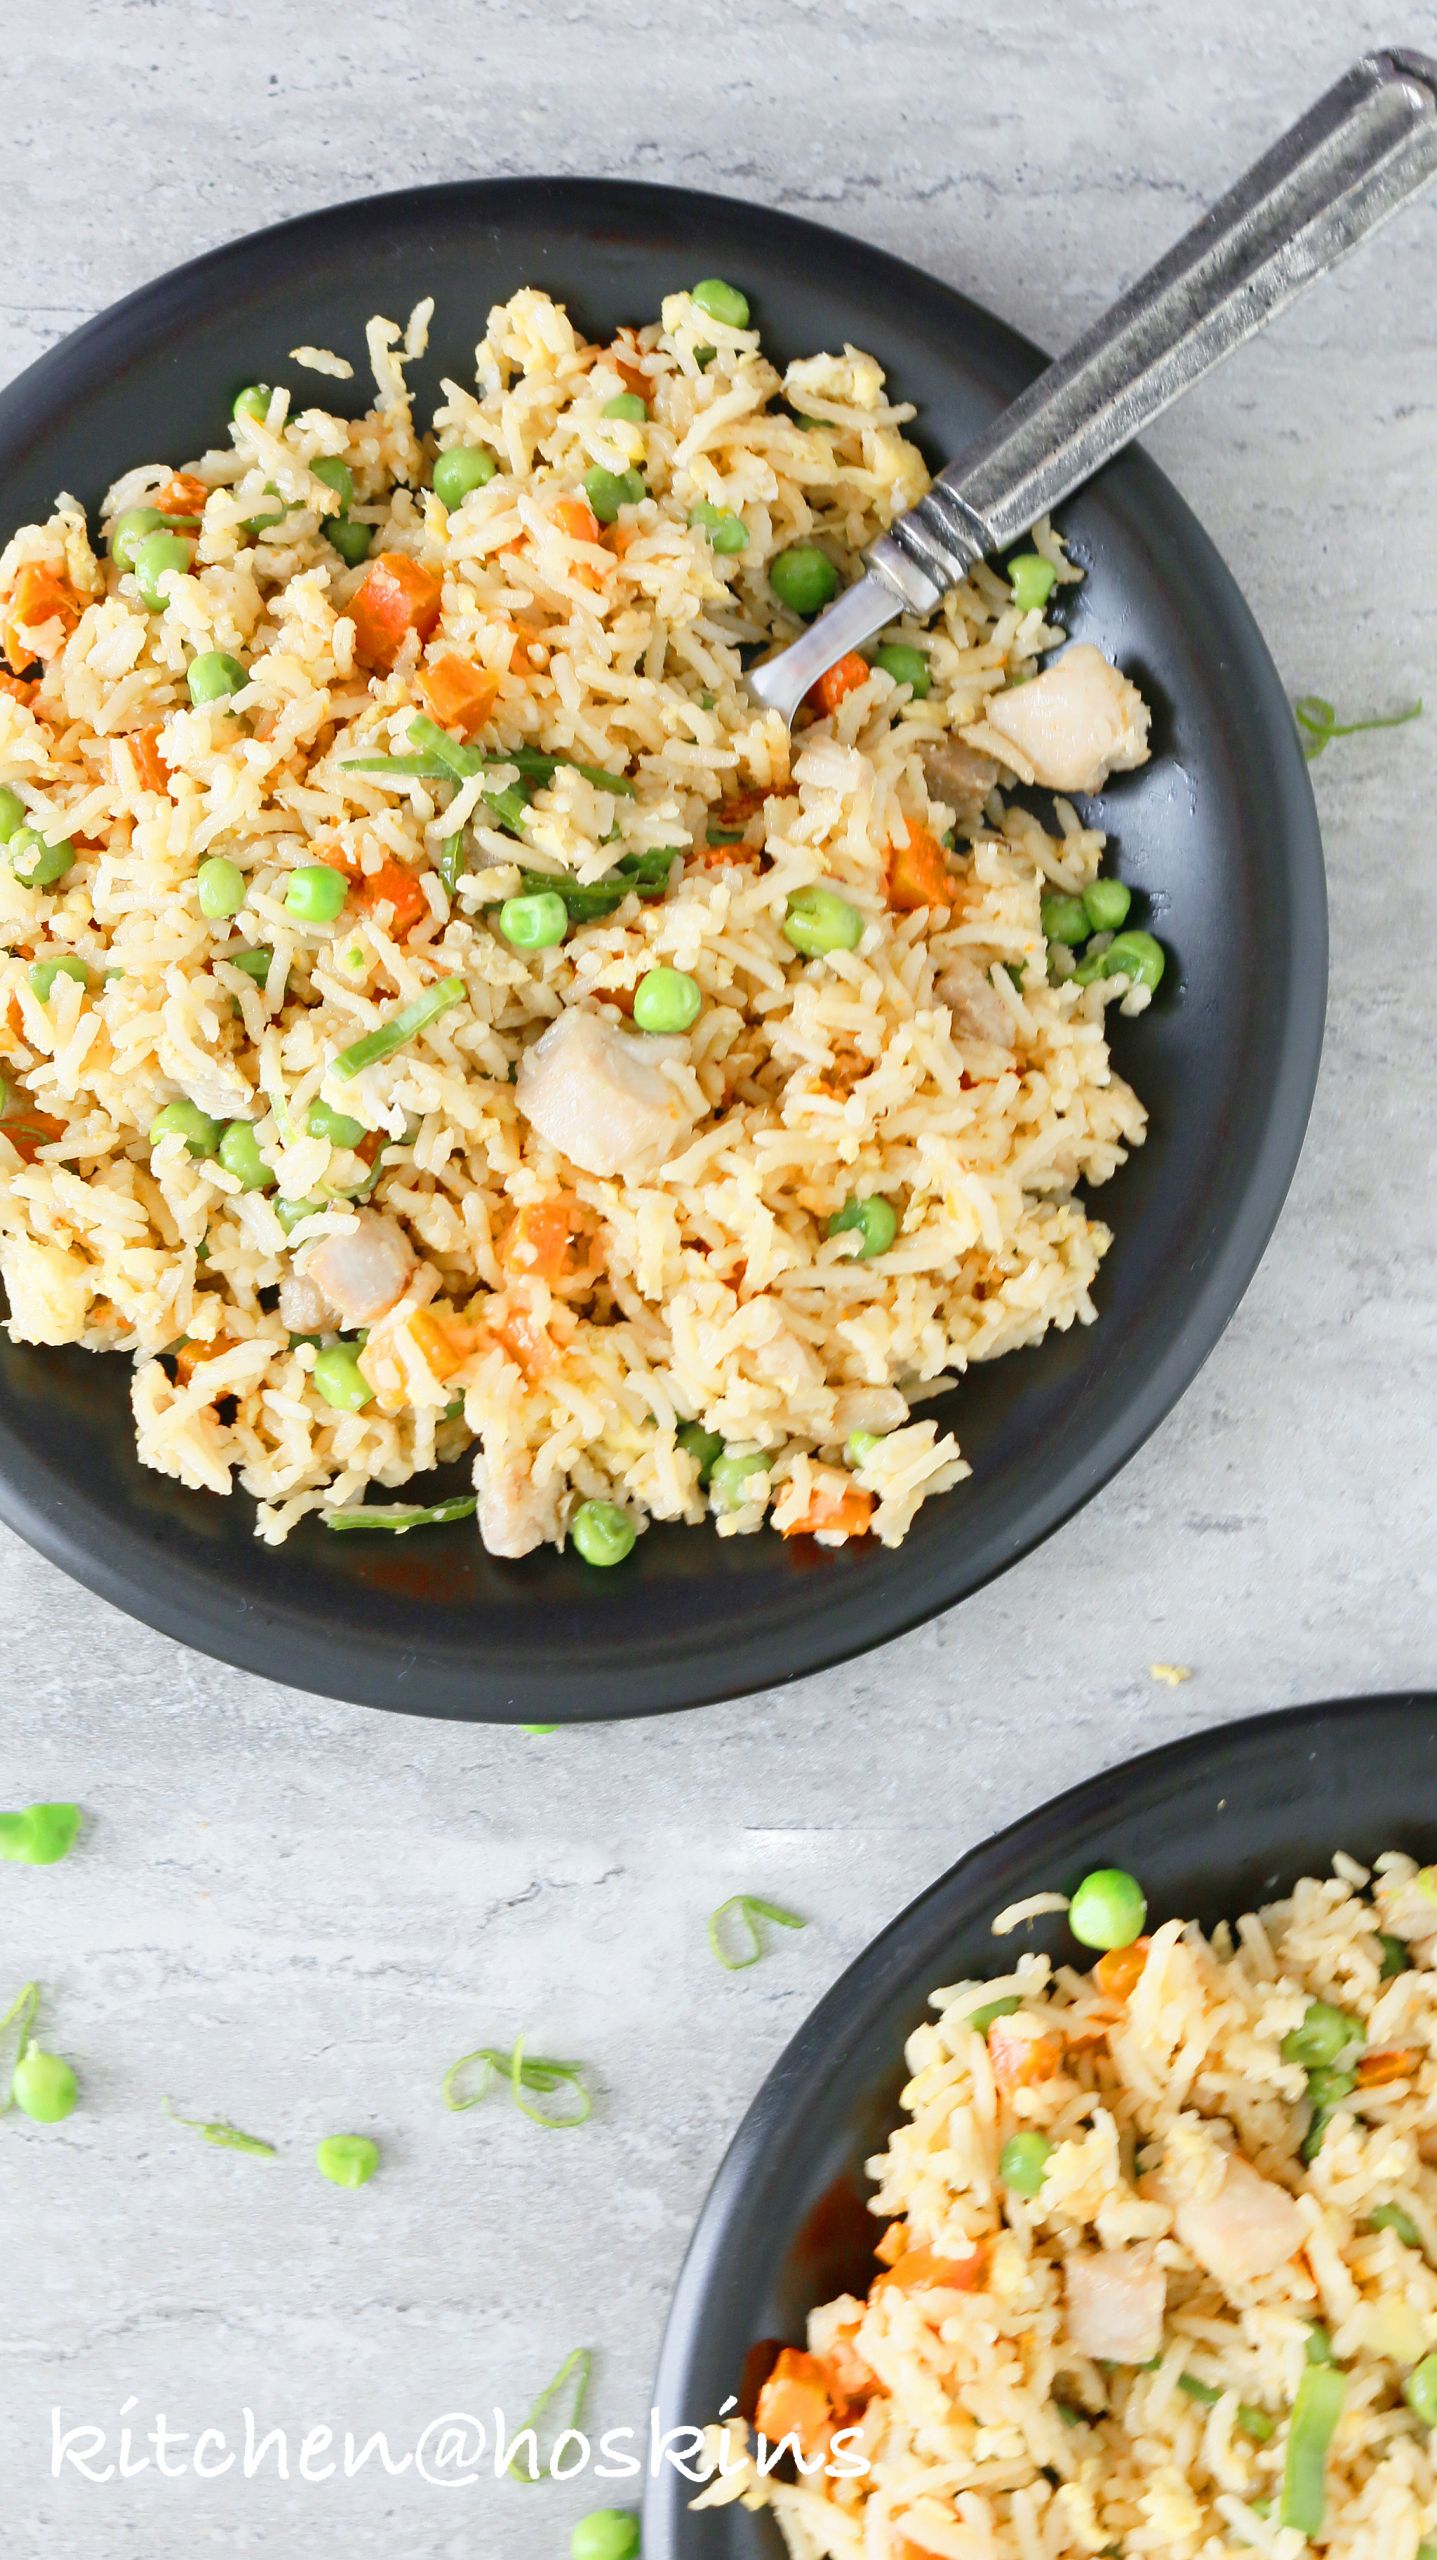 Instant Pot Rice Recipes
 Instant Pot Chicken Fried Rice Kitchen Hoskins